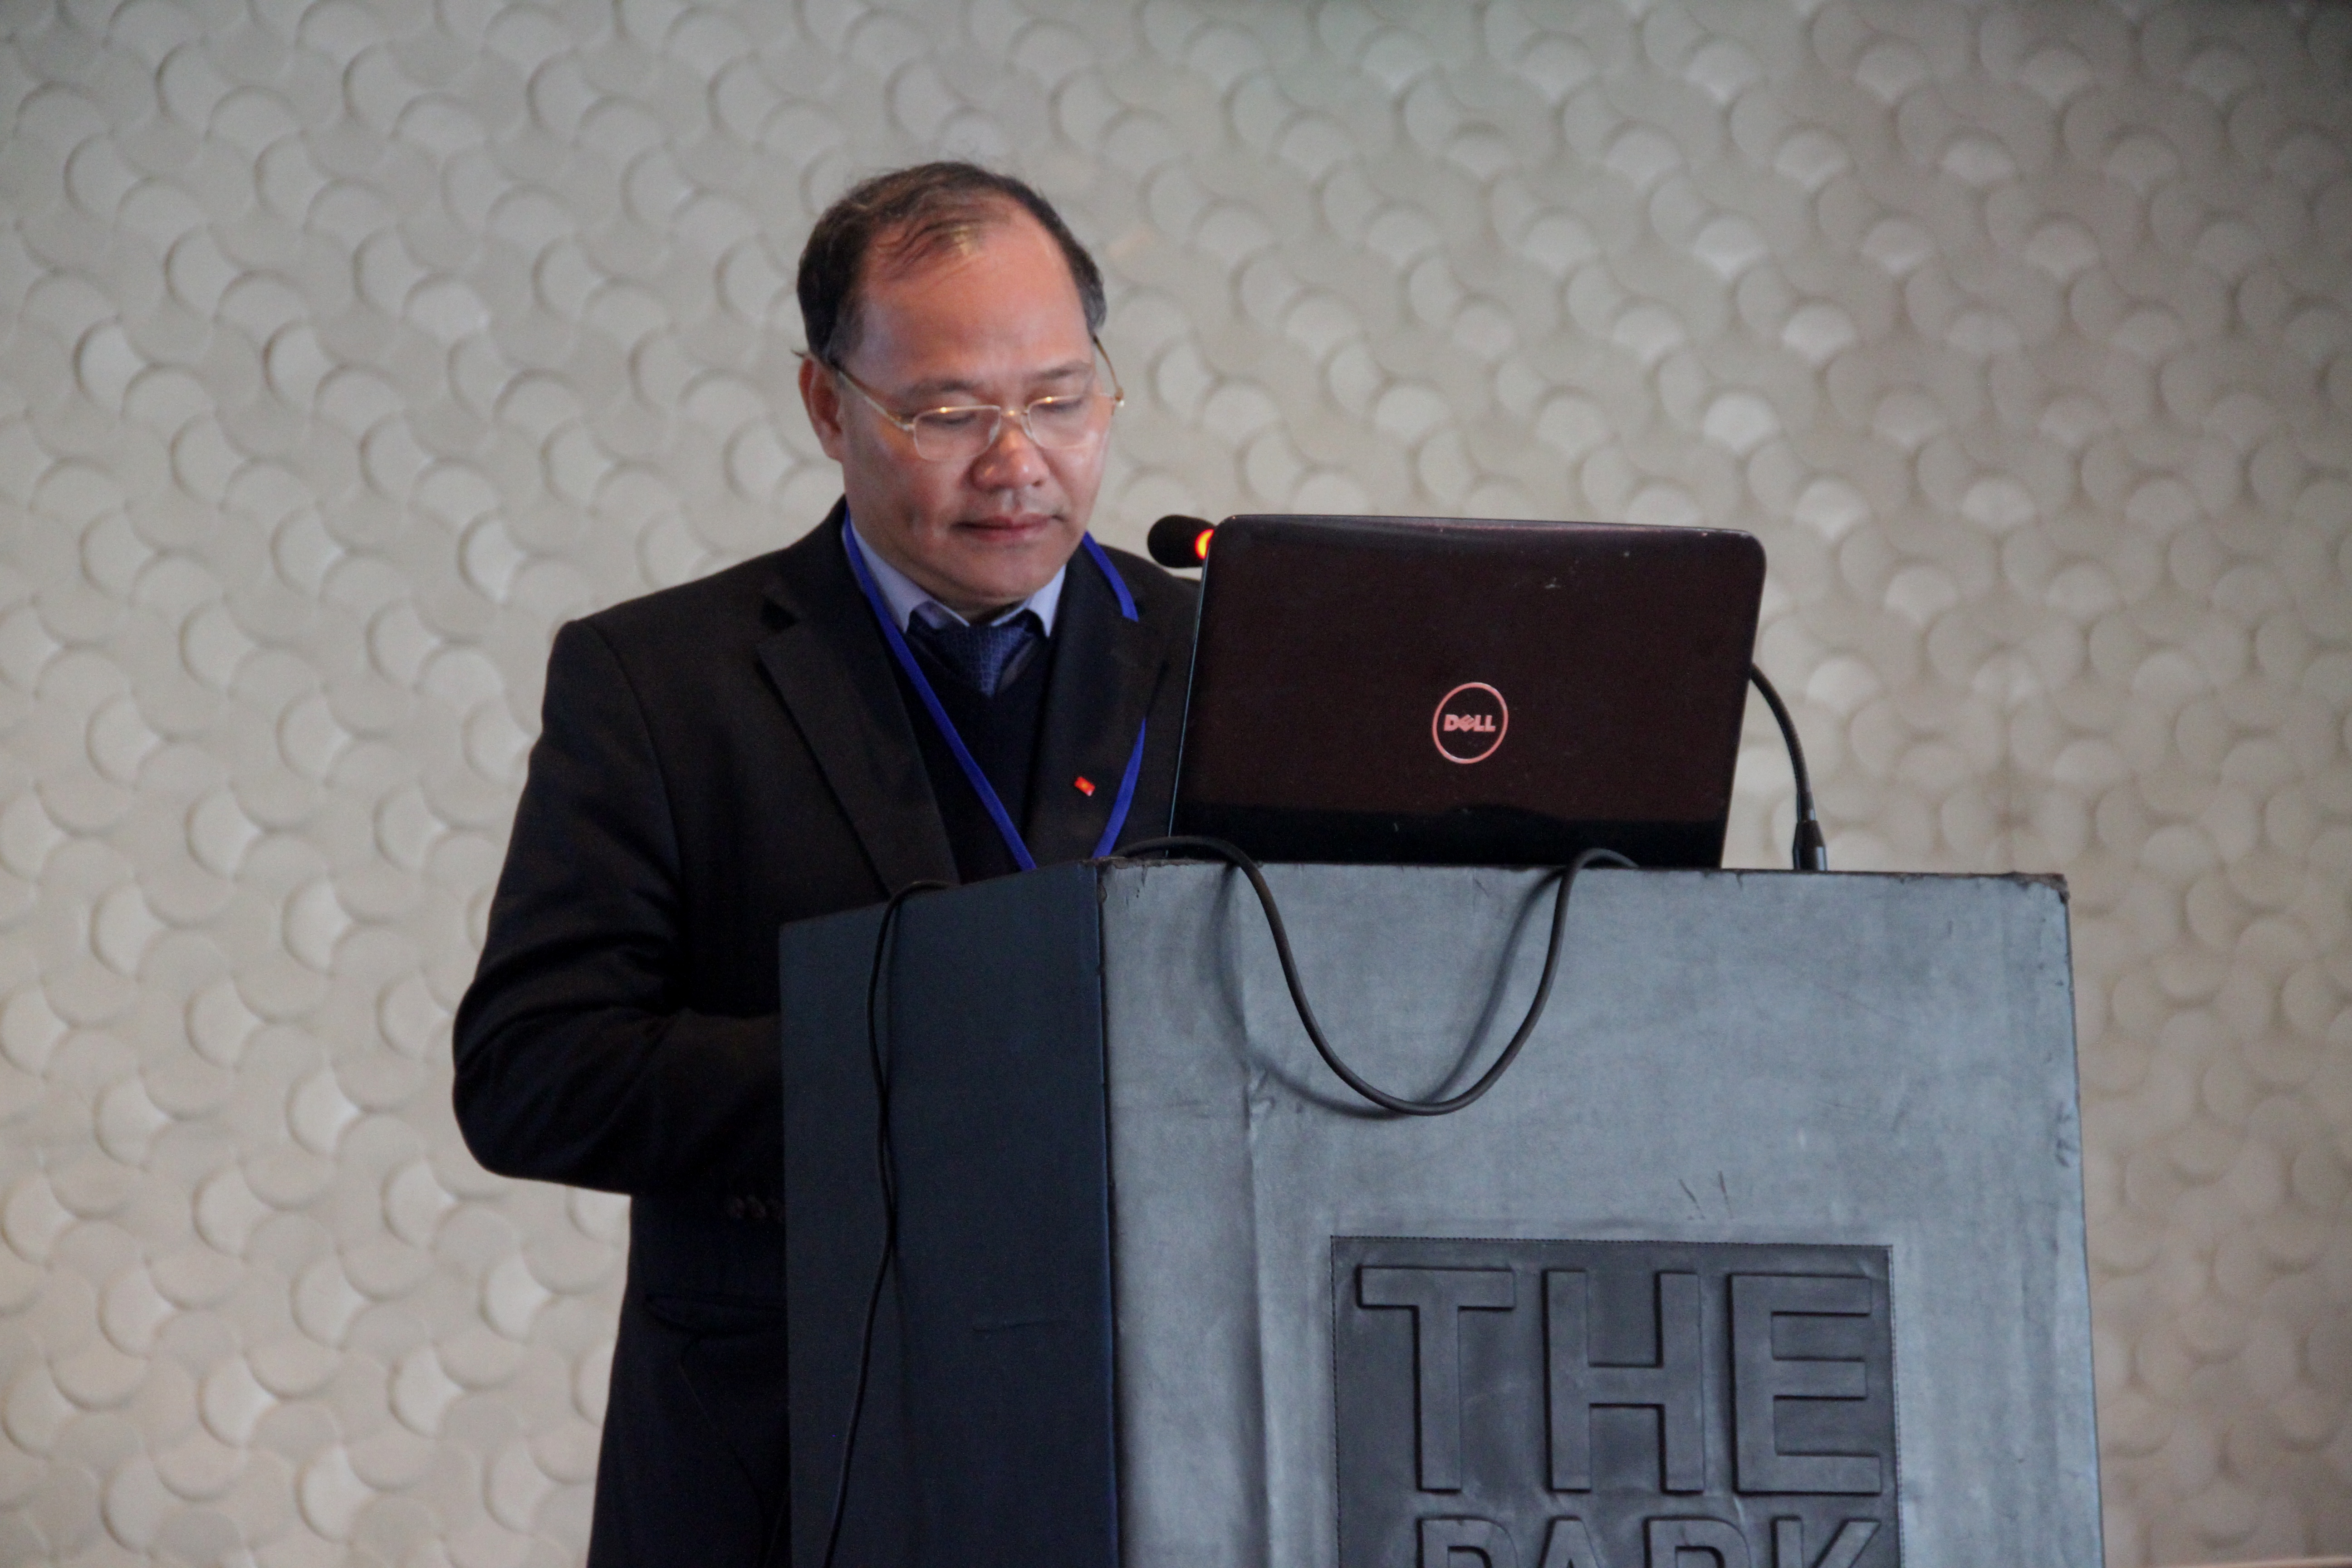 Dr. Hoang Van Thang, Vice Minister Vietnam speaking at the opening session of the RELIEF KIT Workshop in New Delhi